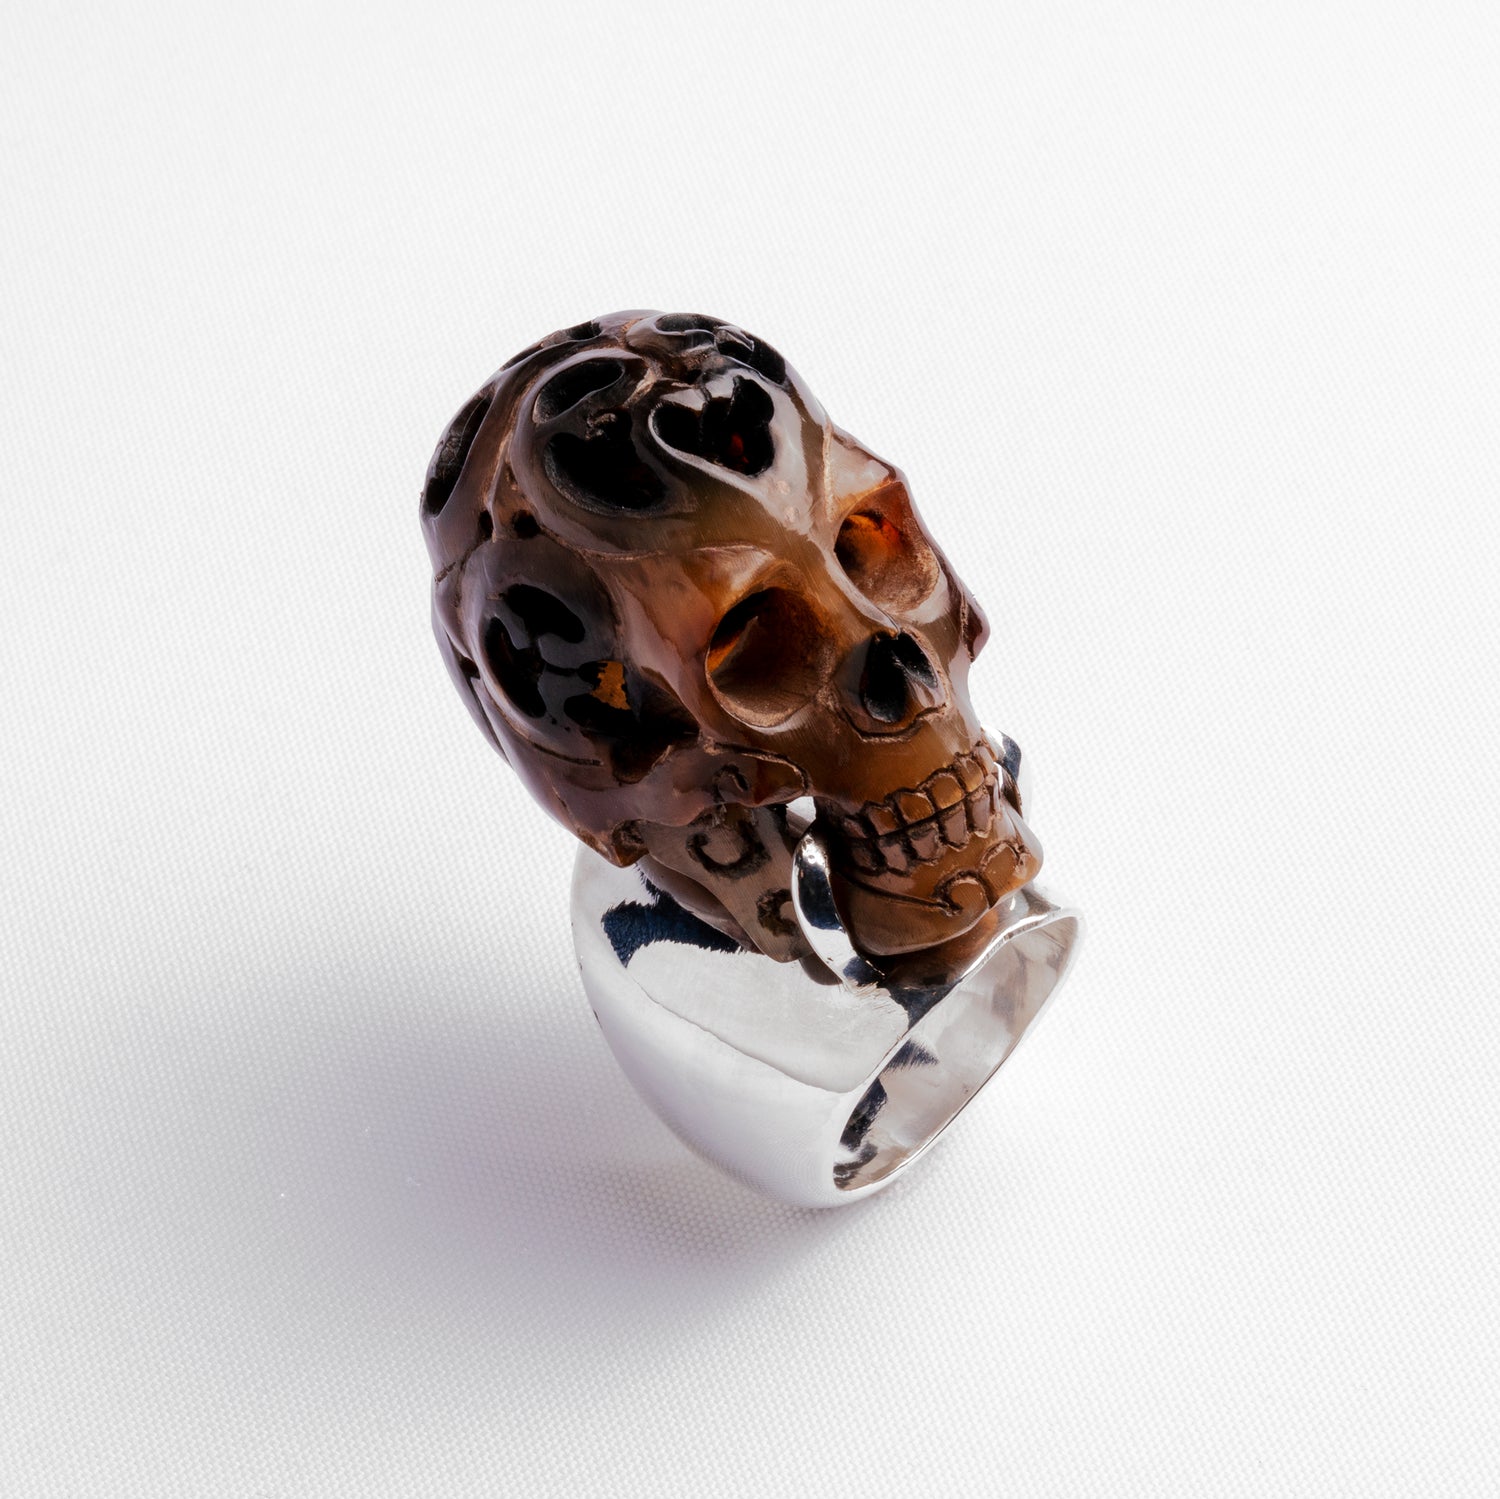 Carved skull and silver ring